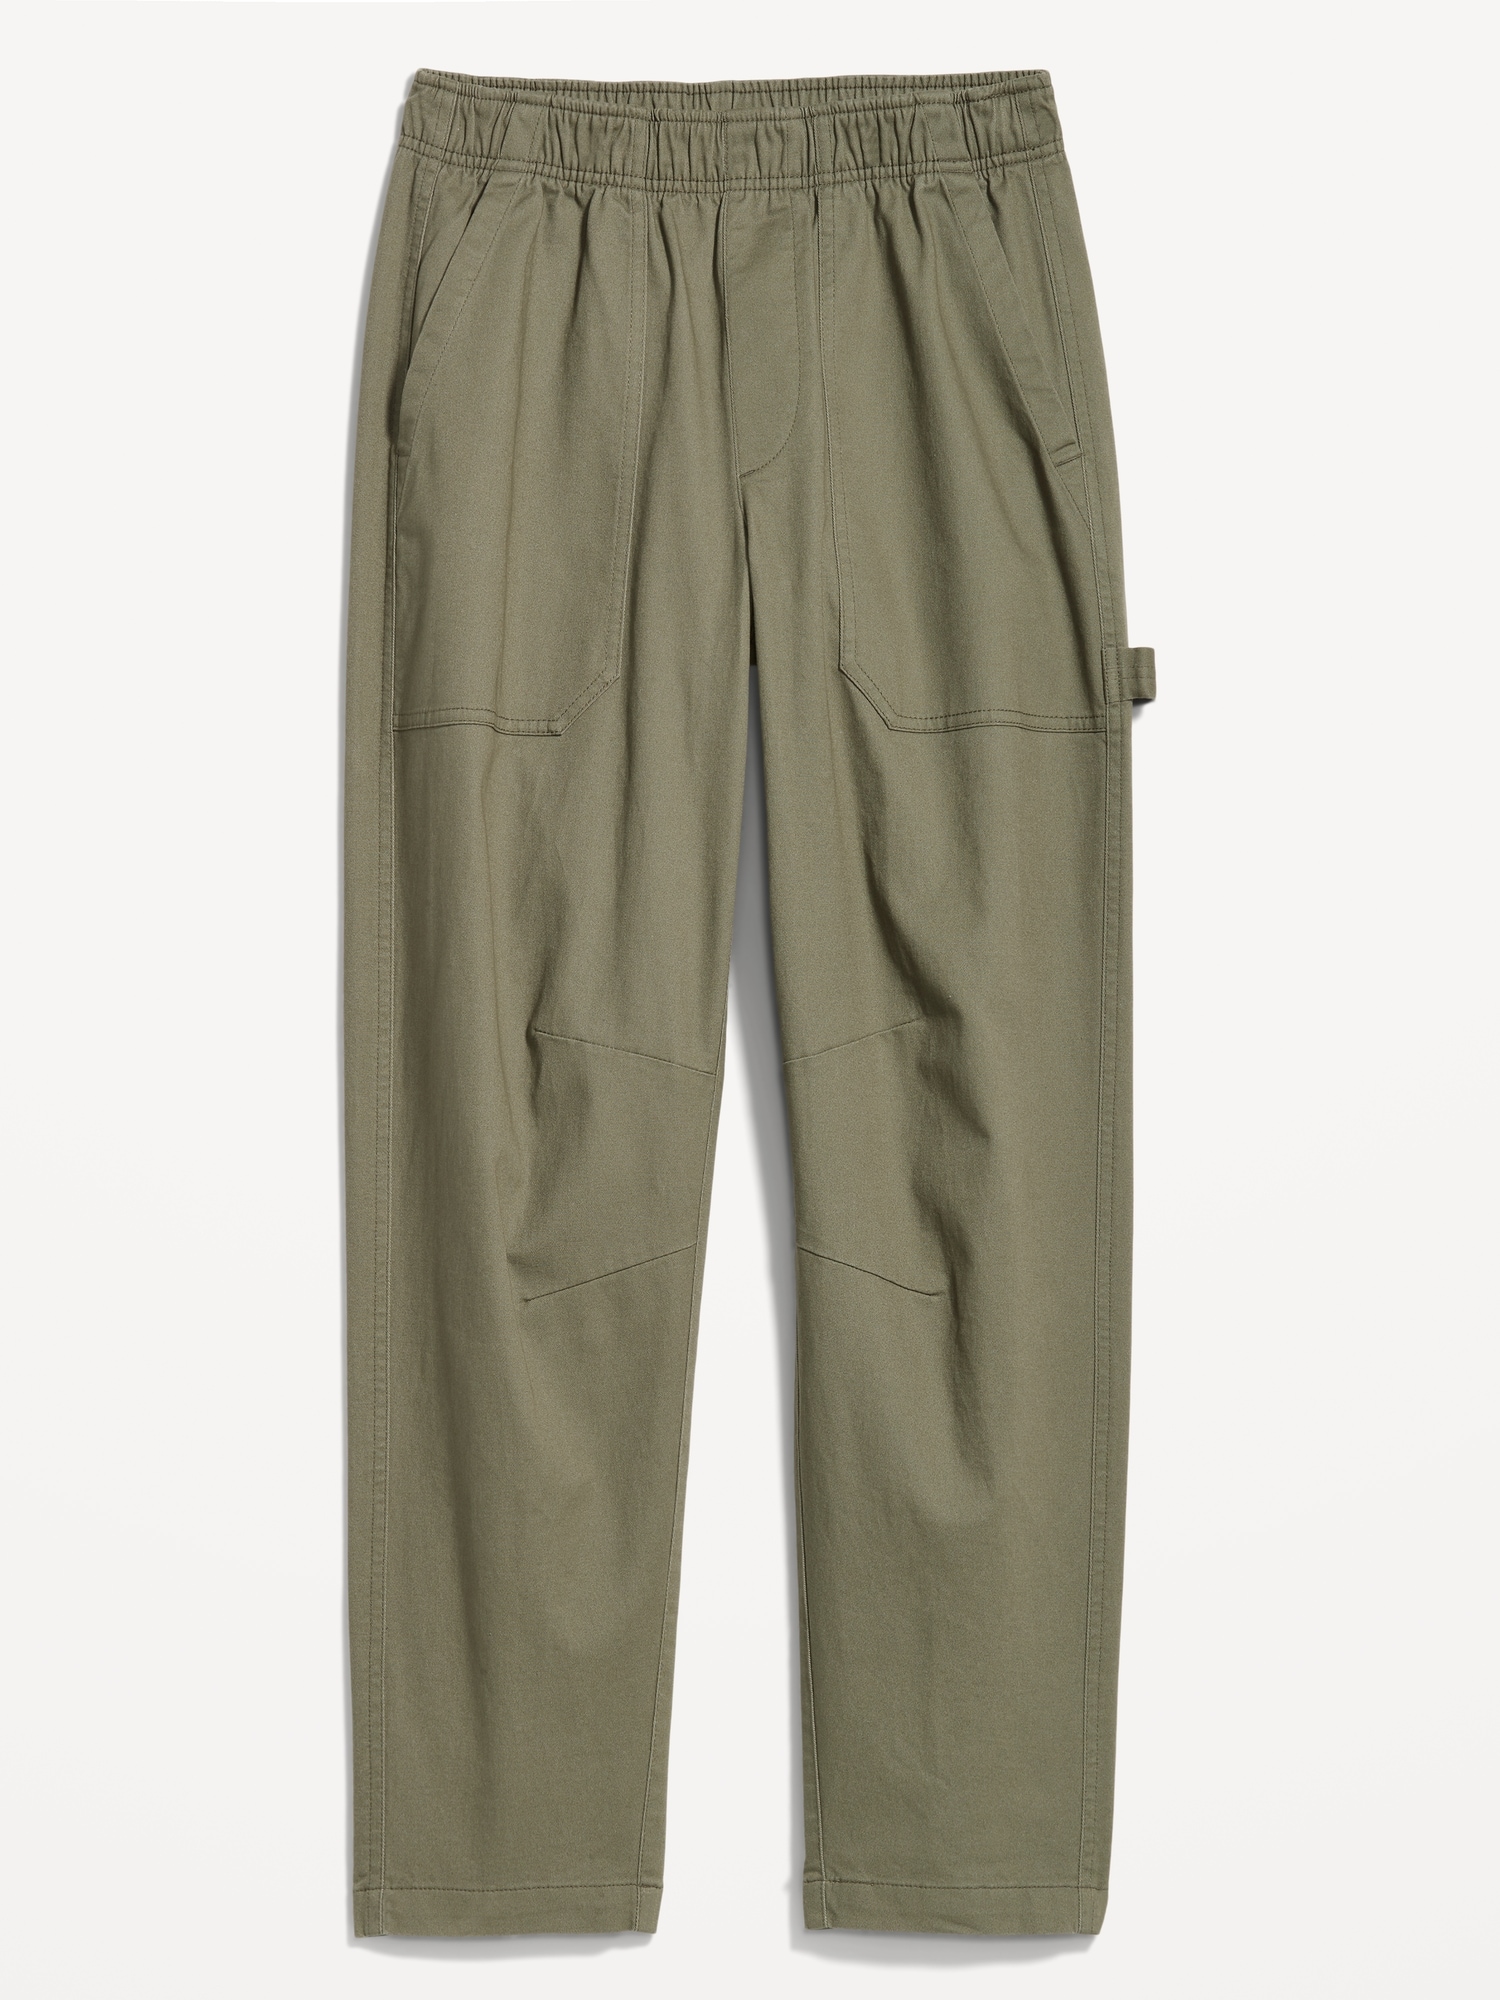 High-Waisted Pulla Utility Pants | Old Navy